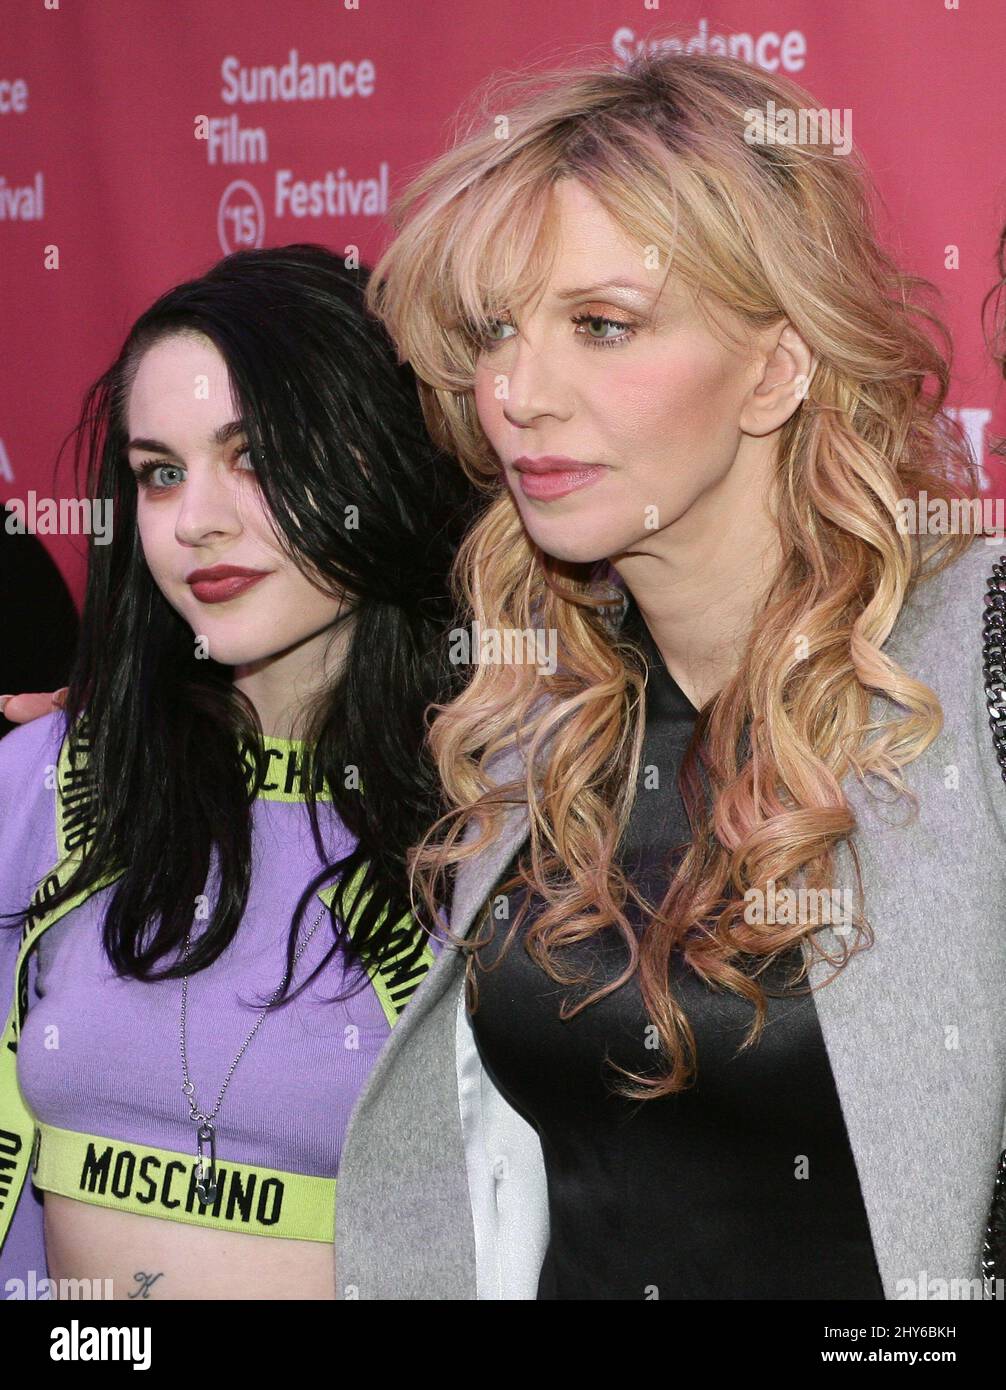 Frances Bean Cobain, Courtney Love attending the 2015 Sundance Film Festival Premiere of KURT COBAIN: MONTAGE OF HECK held at the Marc Stock Photo